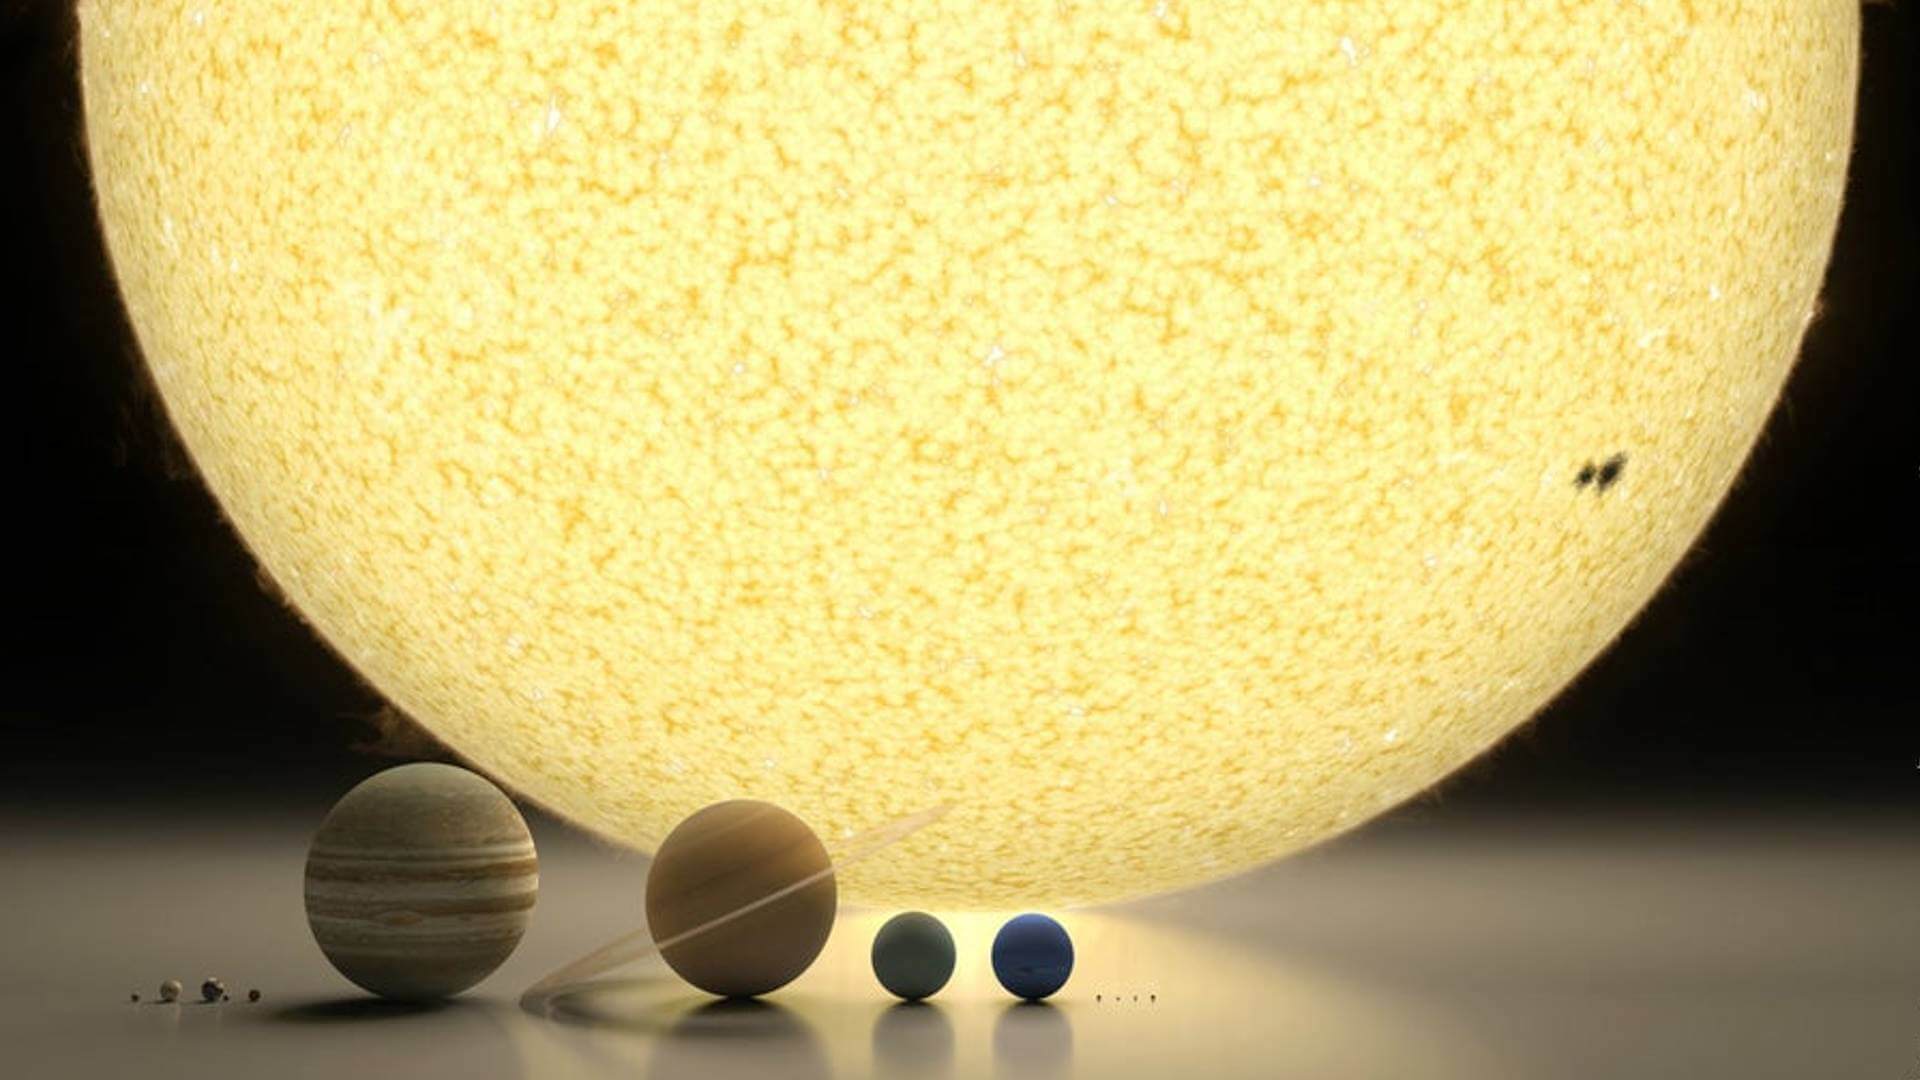 Solar System to scale